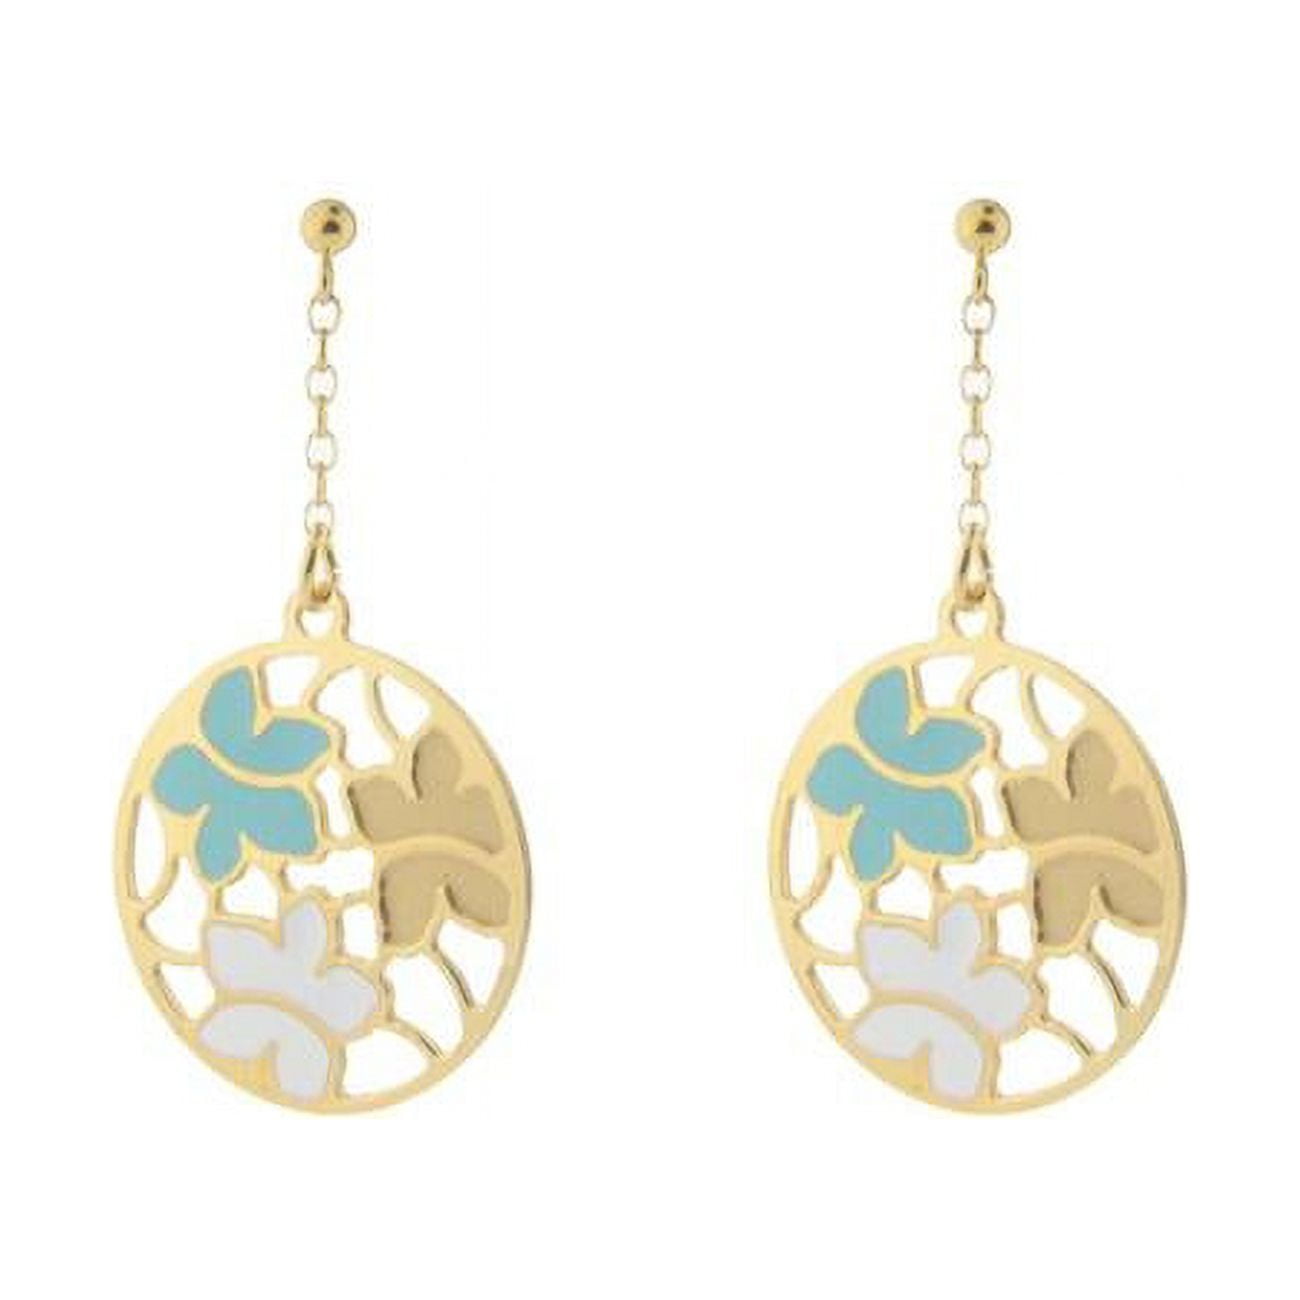 95107t Etruscan Gold Turquoise & White Flower Earrings In Sterling Silver